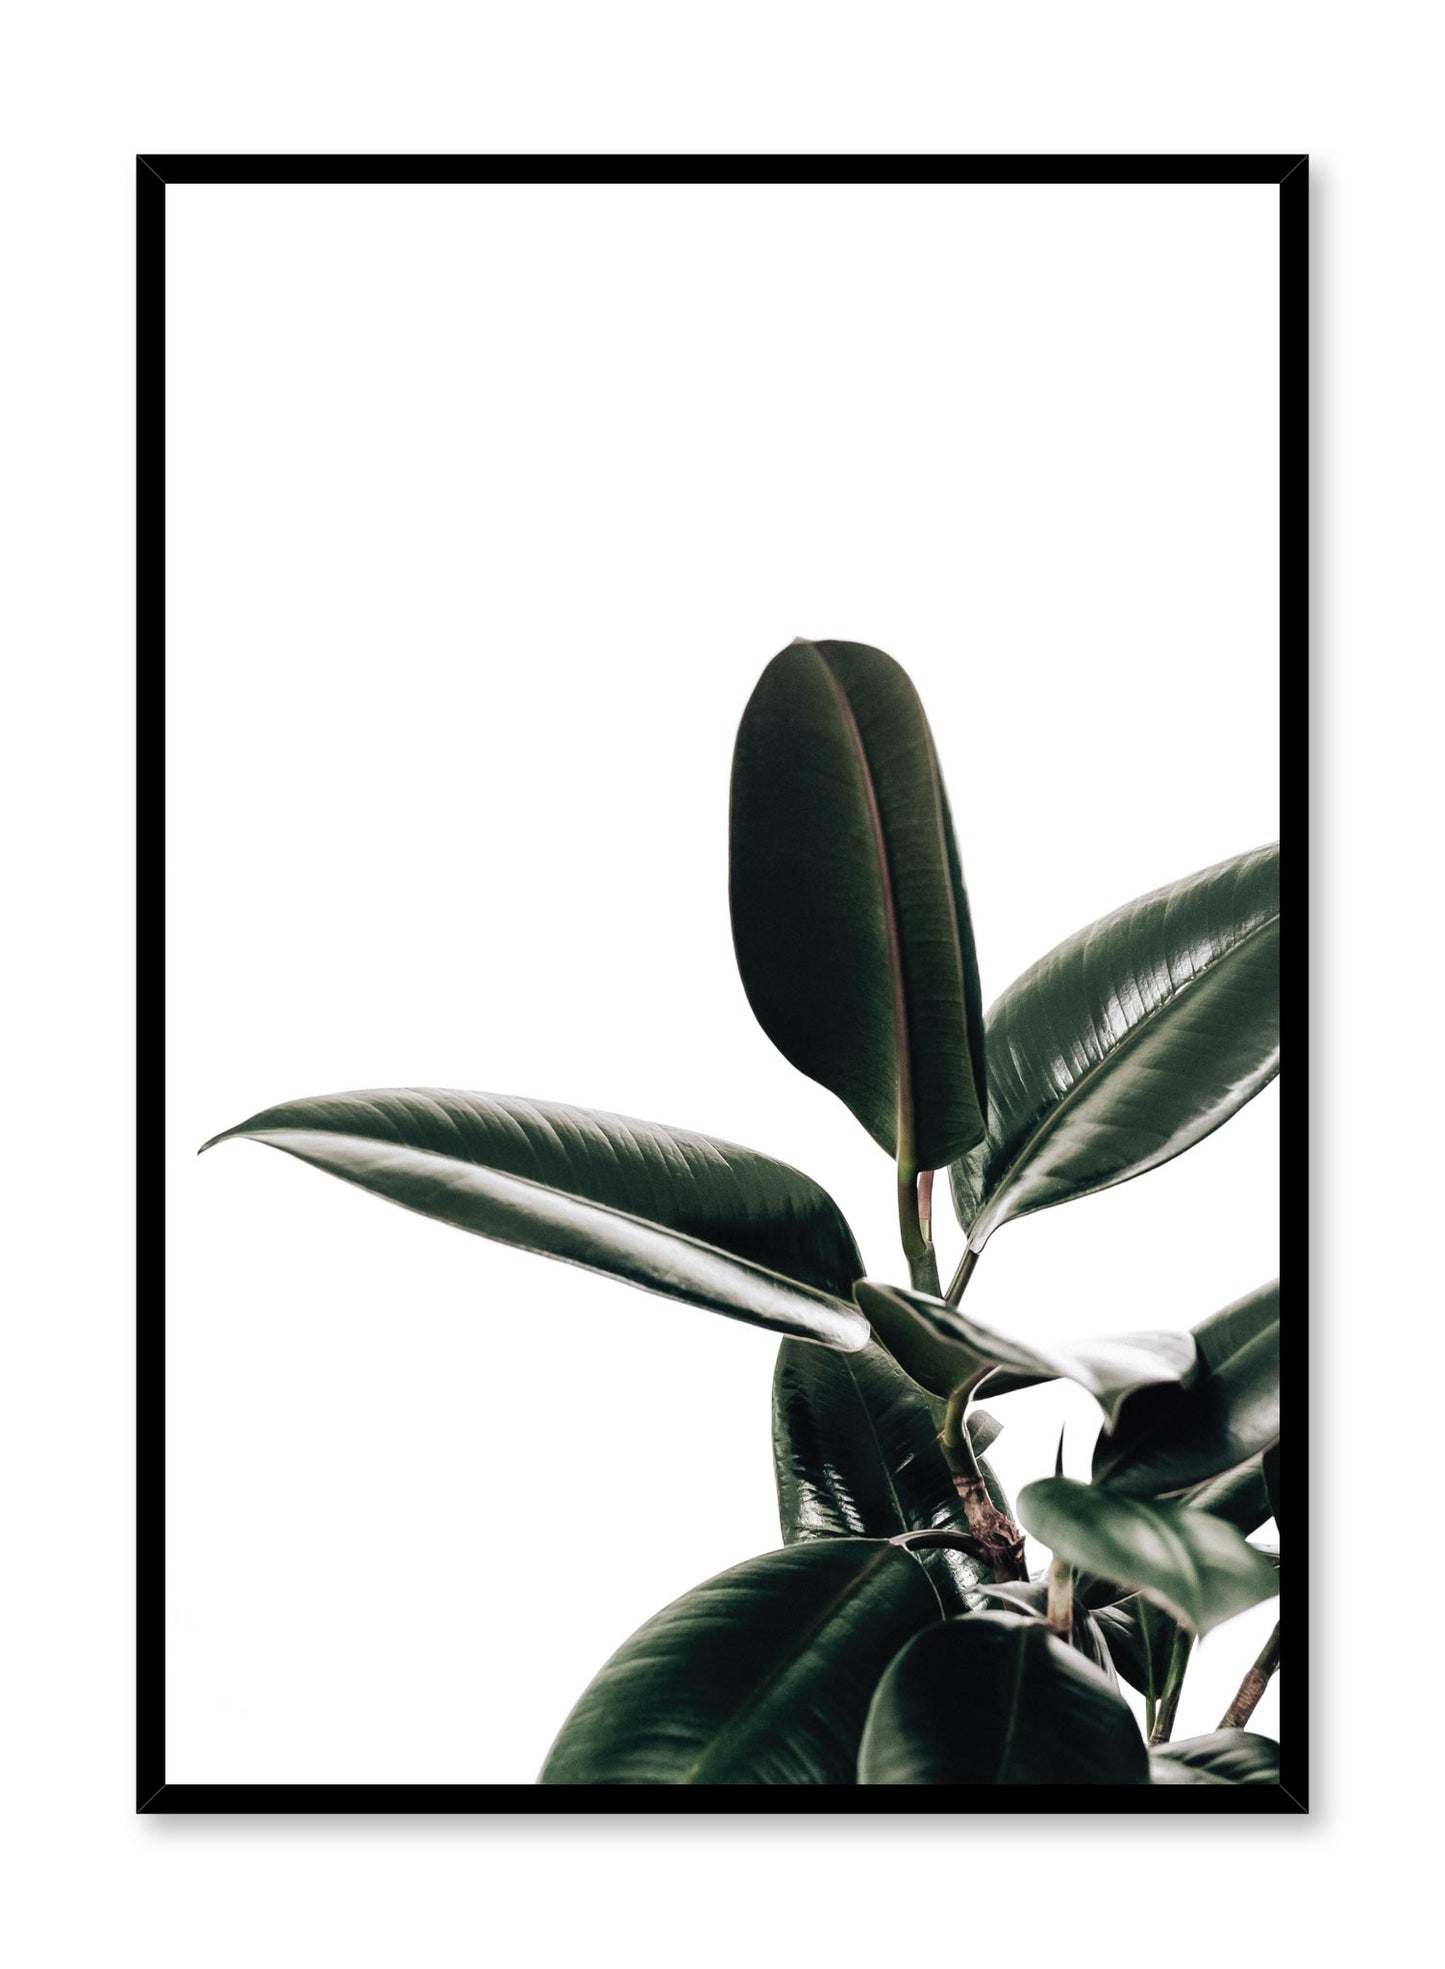 Minimalistic wall poster by Opposite Wall with rubber tree botanical photography